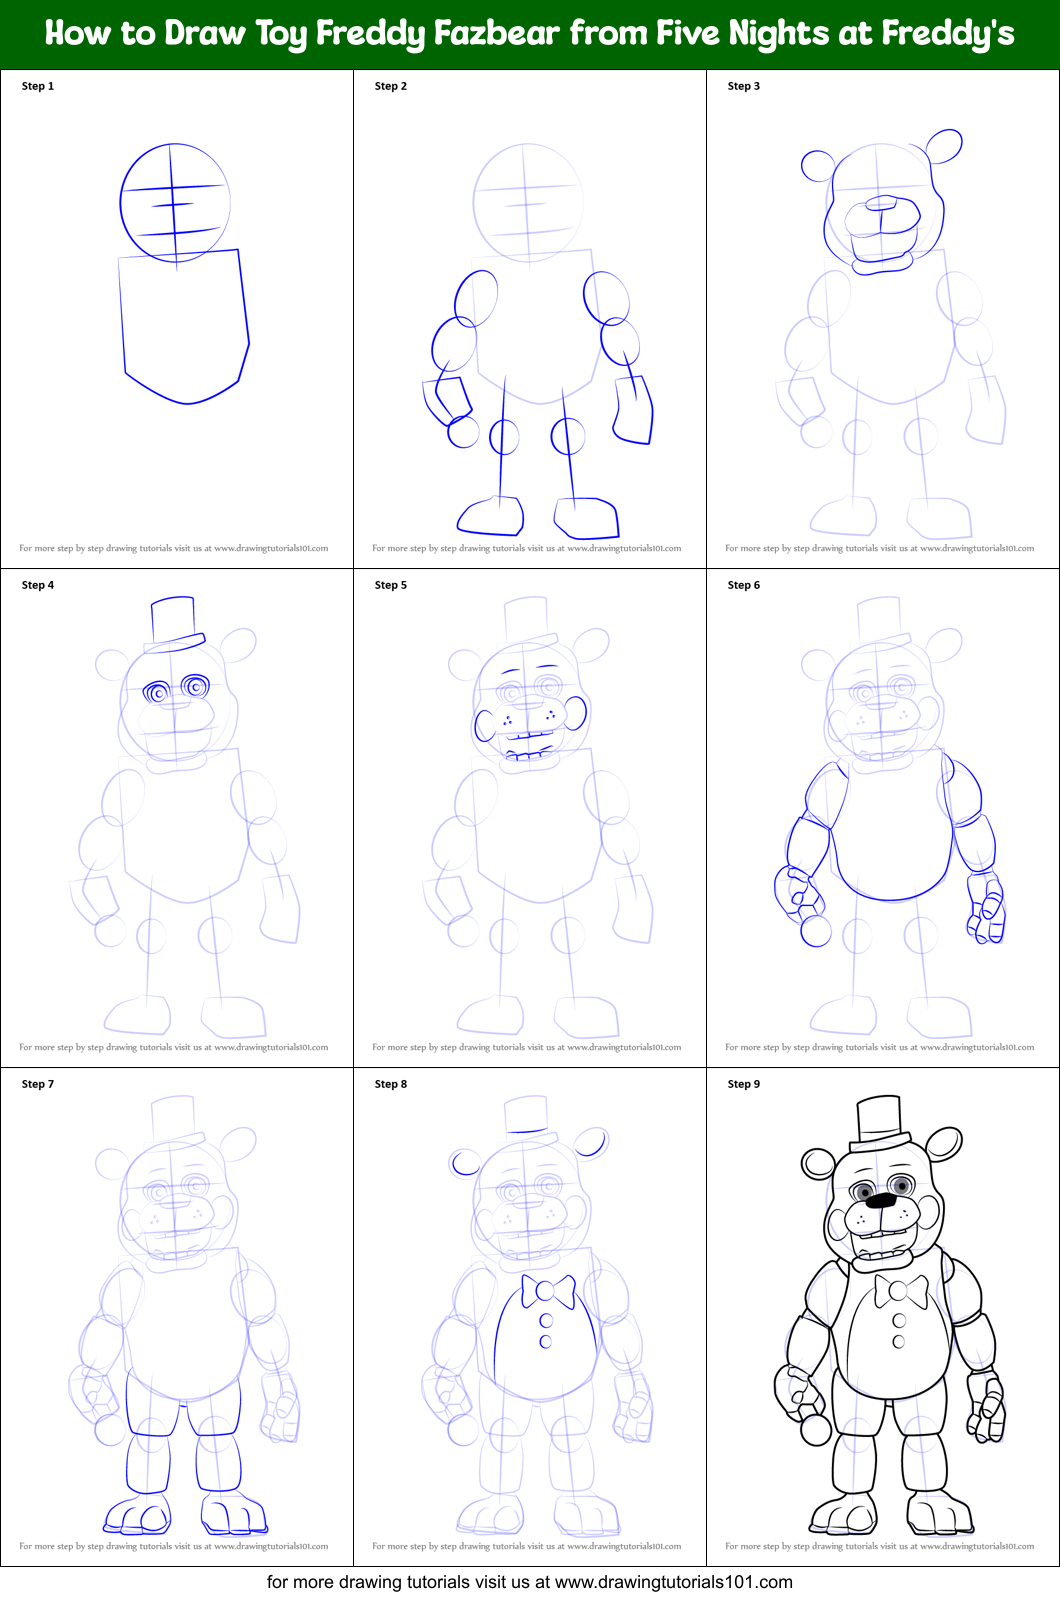 How to Draw Toy Freddy Fazbear from Five Nights at Freddy's printable